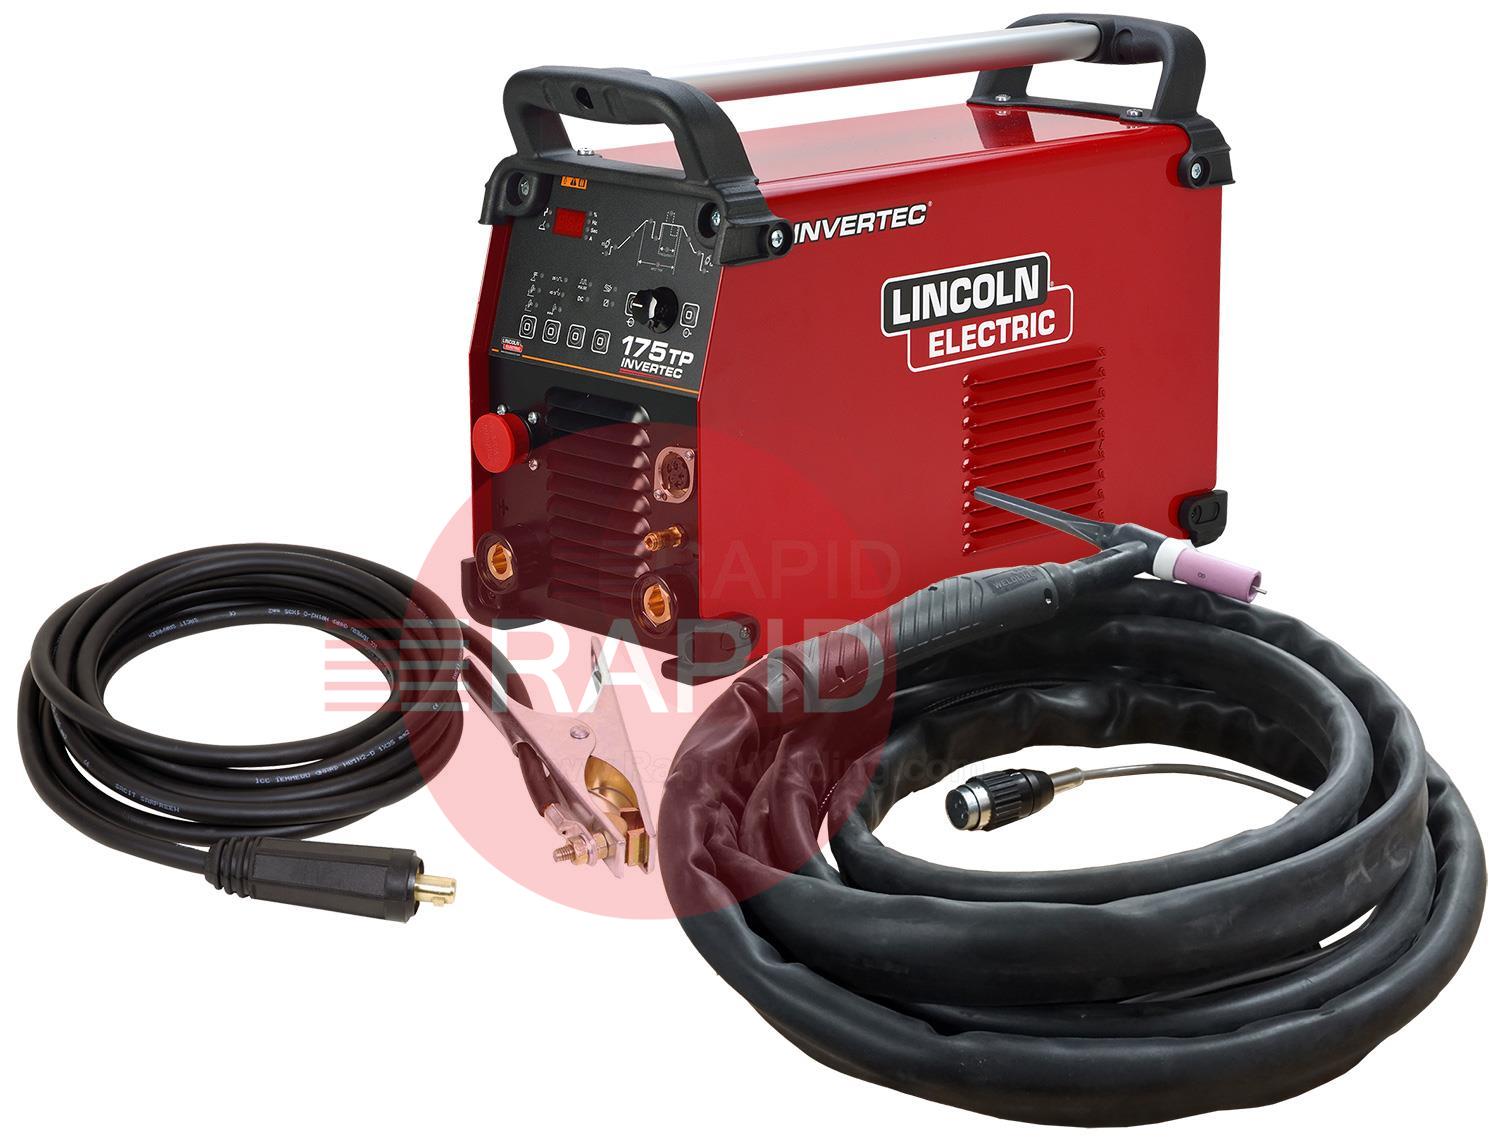 K14169-1P  Lincoln Invertec 175TP DC TIG Welder Ready To Weld Package - 230v, 1ph